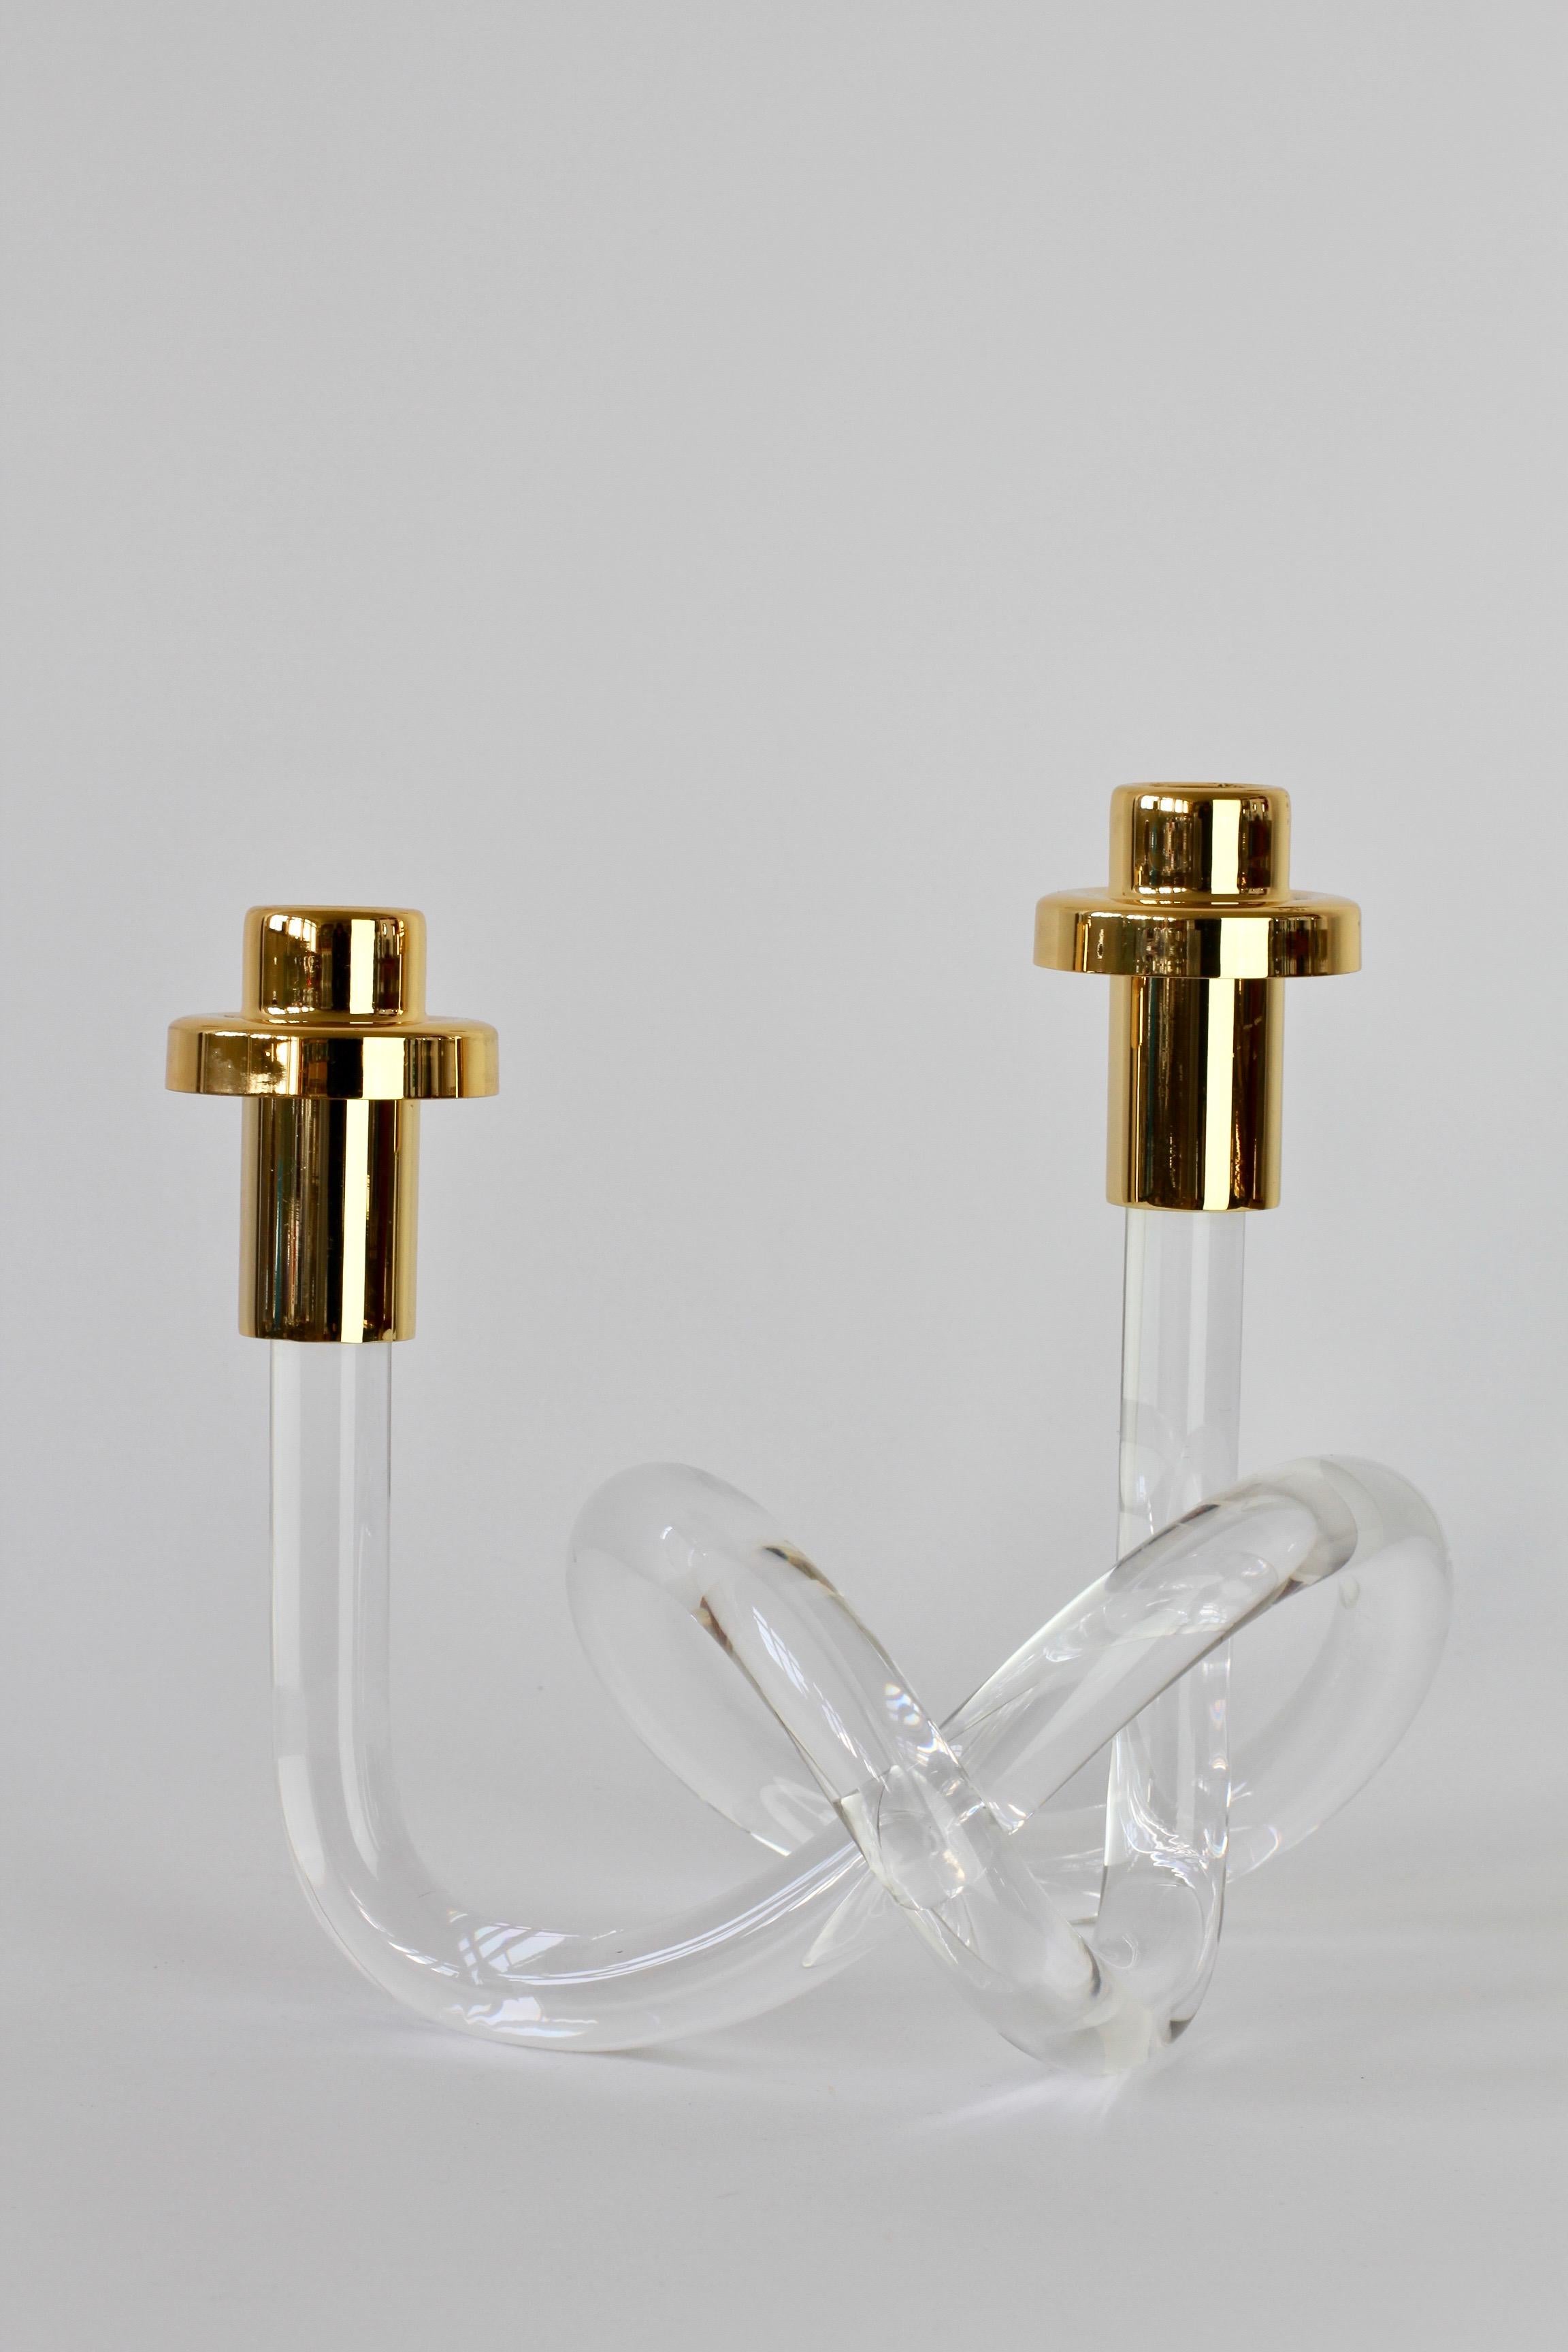 Gold and Lucite Twisted Pretzel Candlestick Holder/Candelabra by Dorothy Thorpe 7